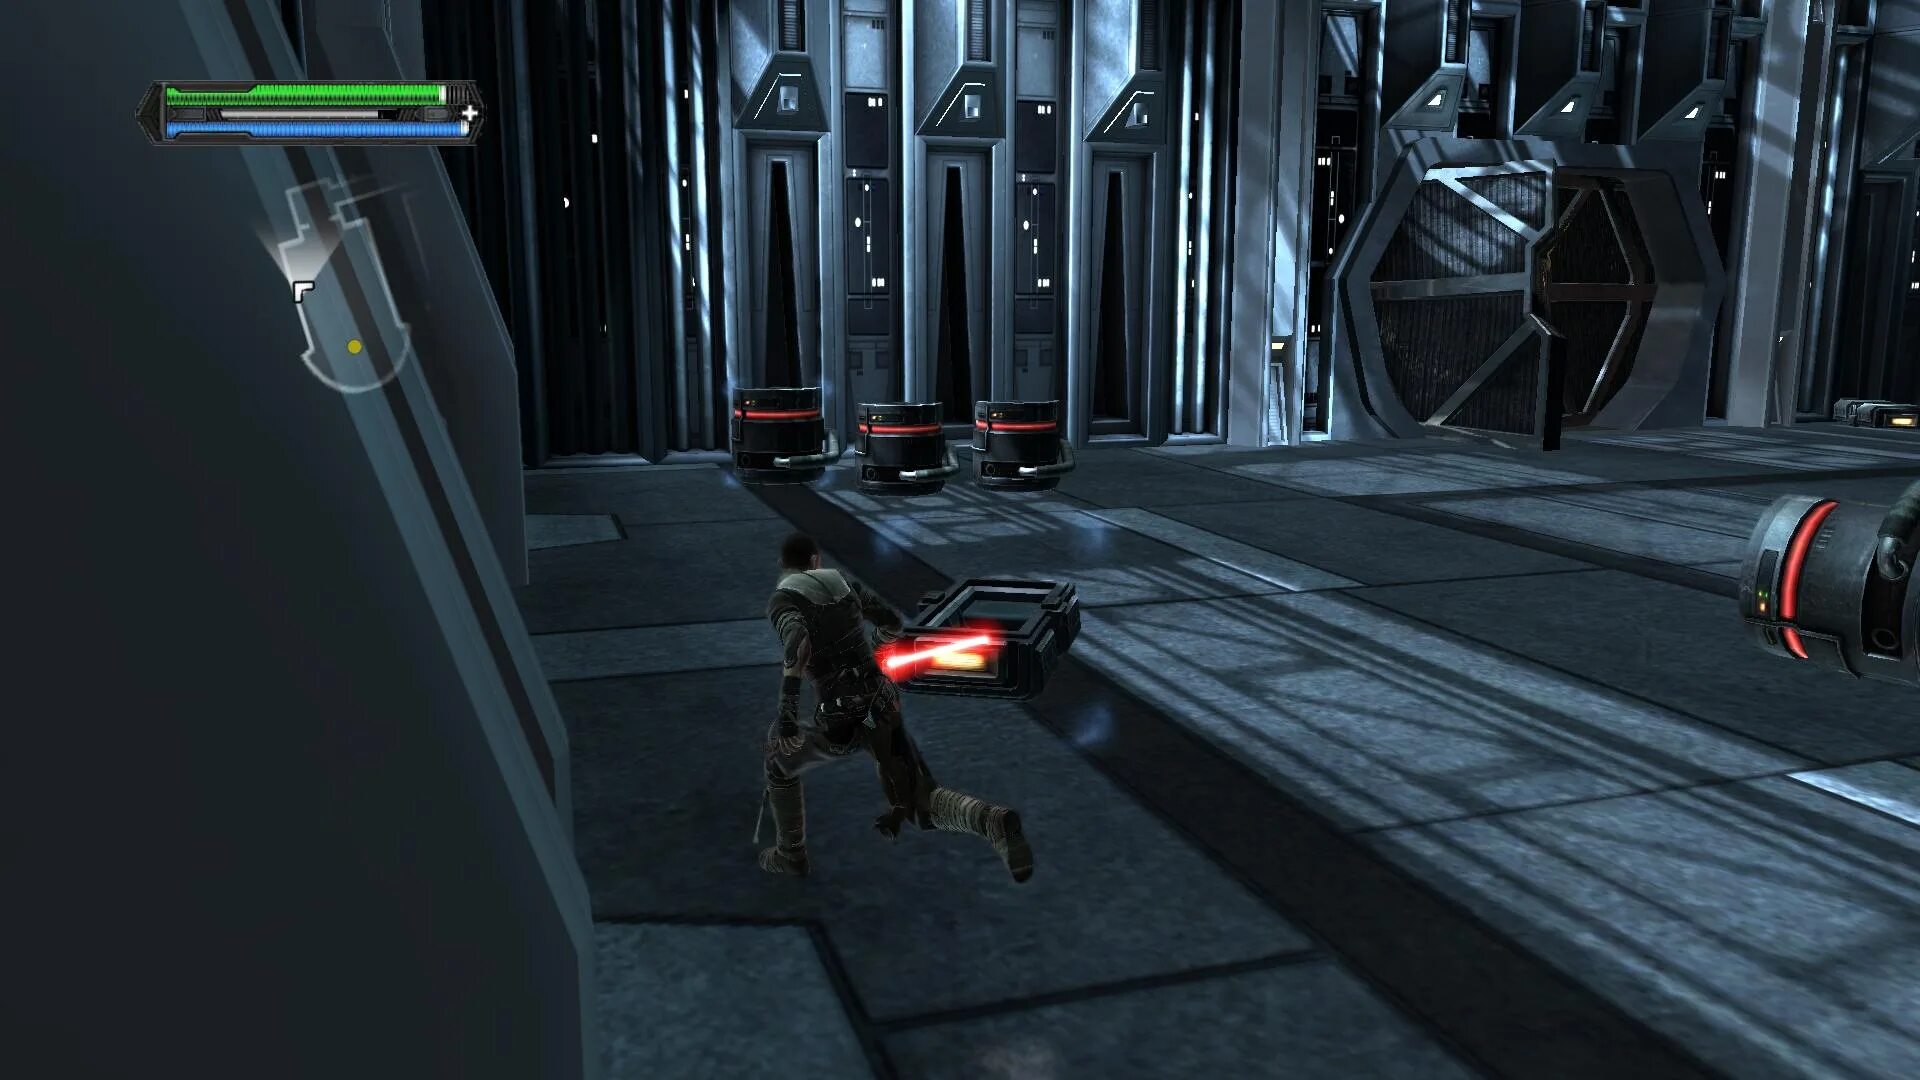 Star Wars: the Force unleashed - Ultimate Sith Edition. 10) Star Wars: the Force unleashed. Star Wars the Force unleashed Boss. Коды star wars the force unleashed 2